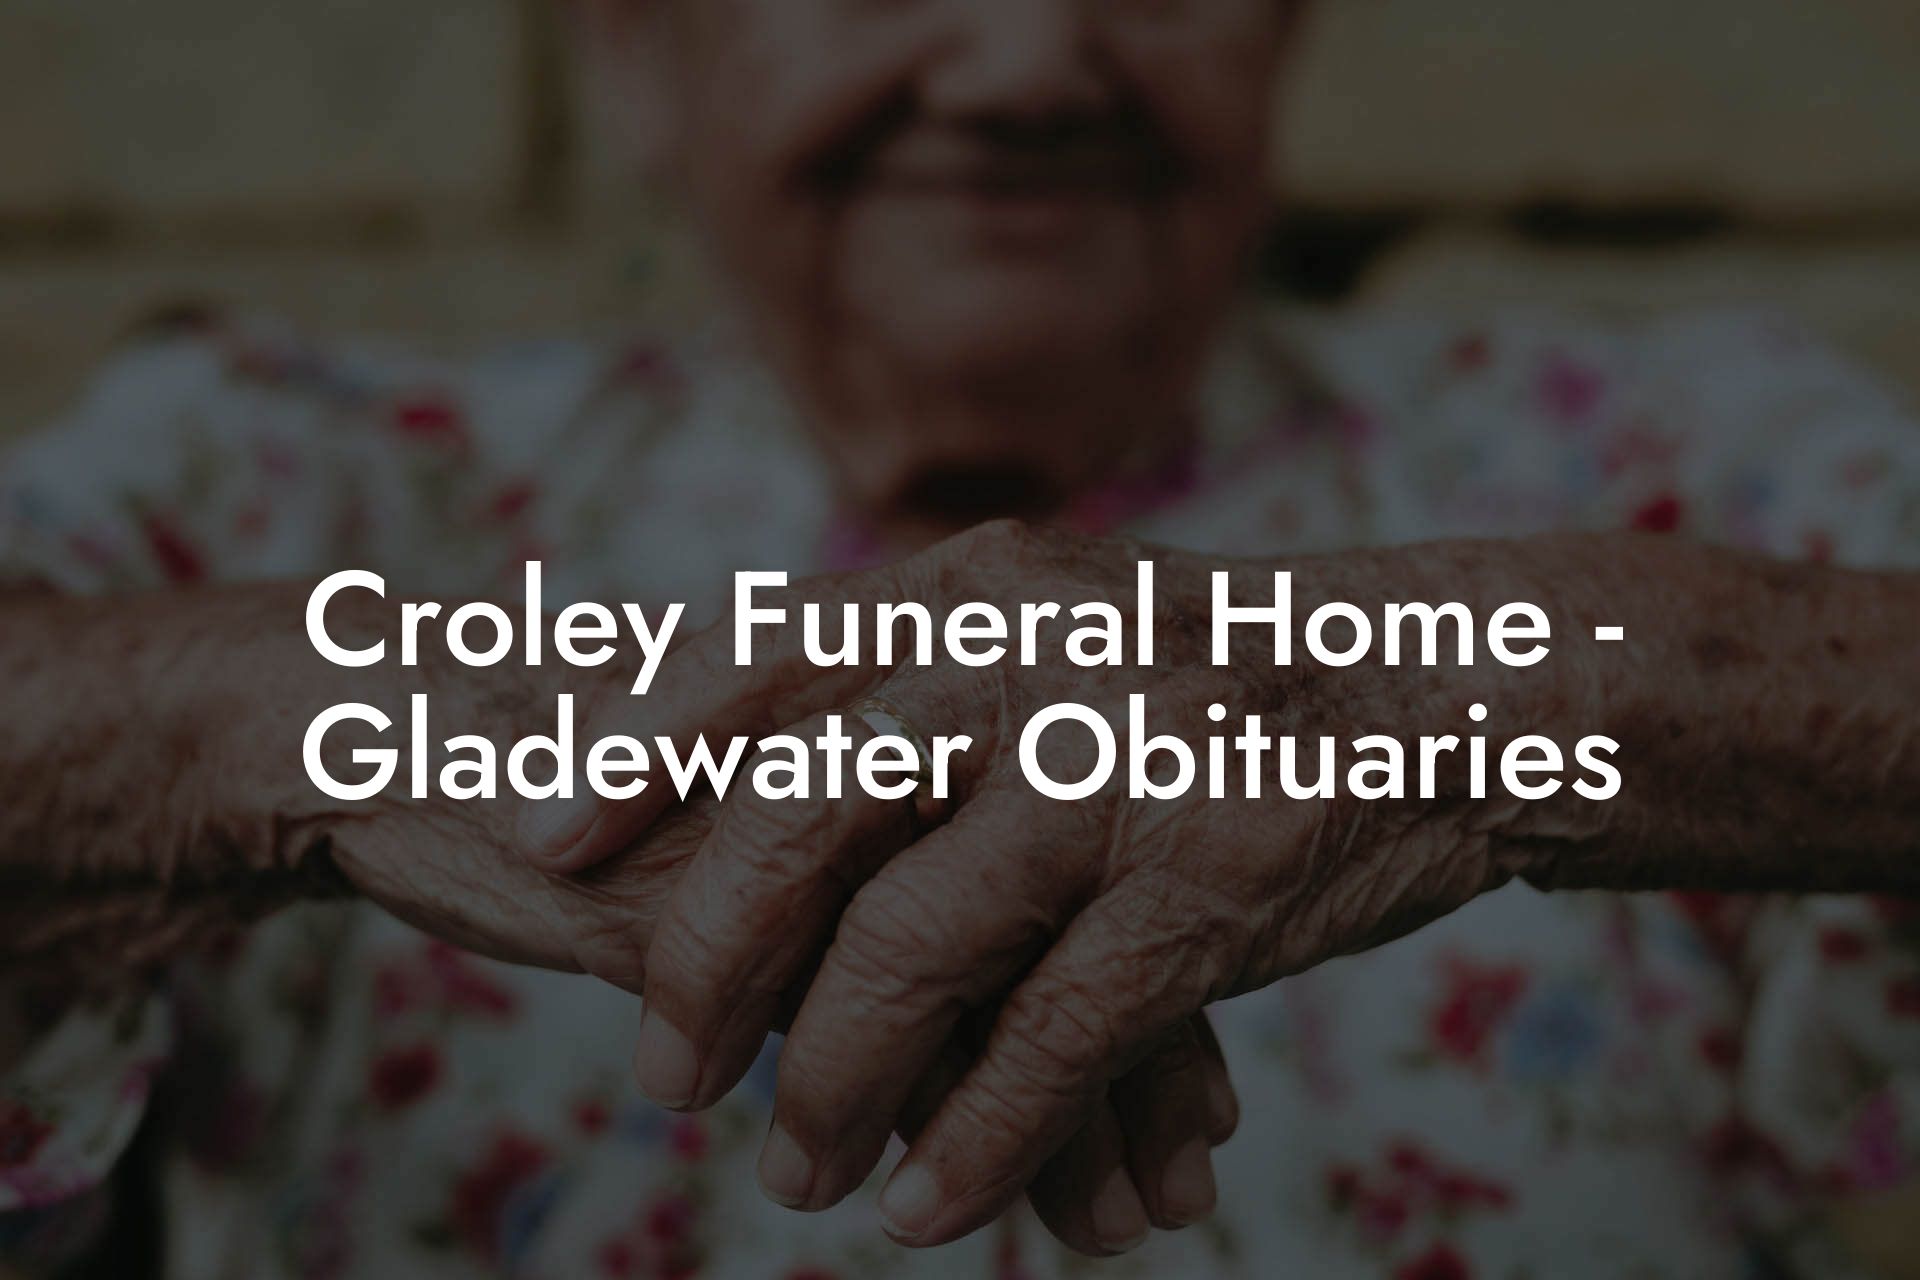 Croley Funeral Home - Gladewater Obituaries